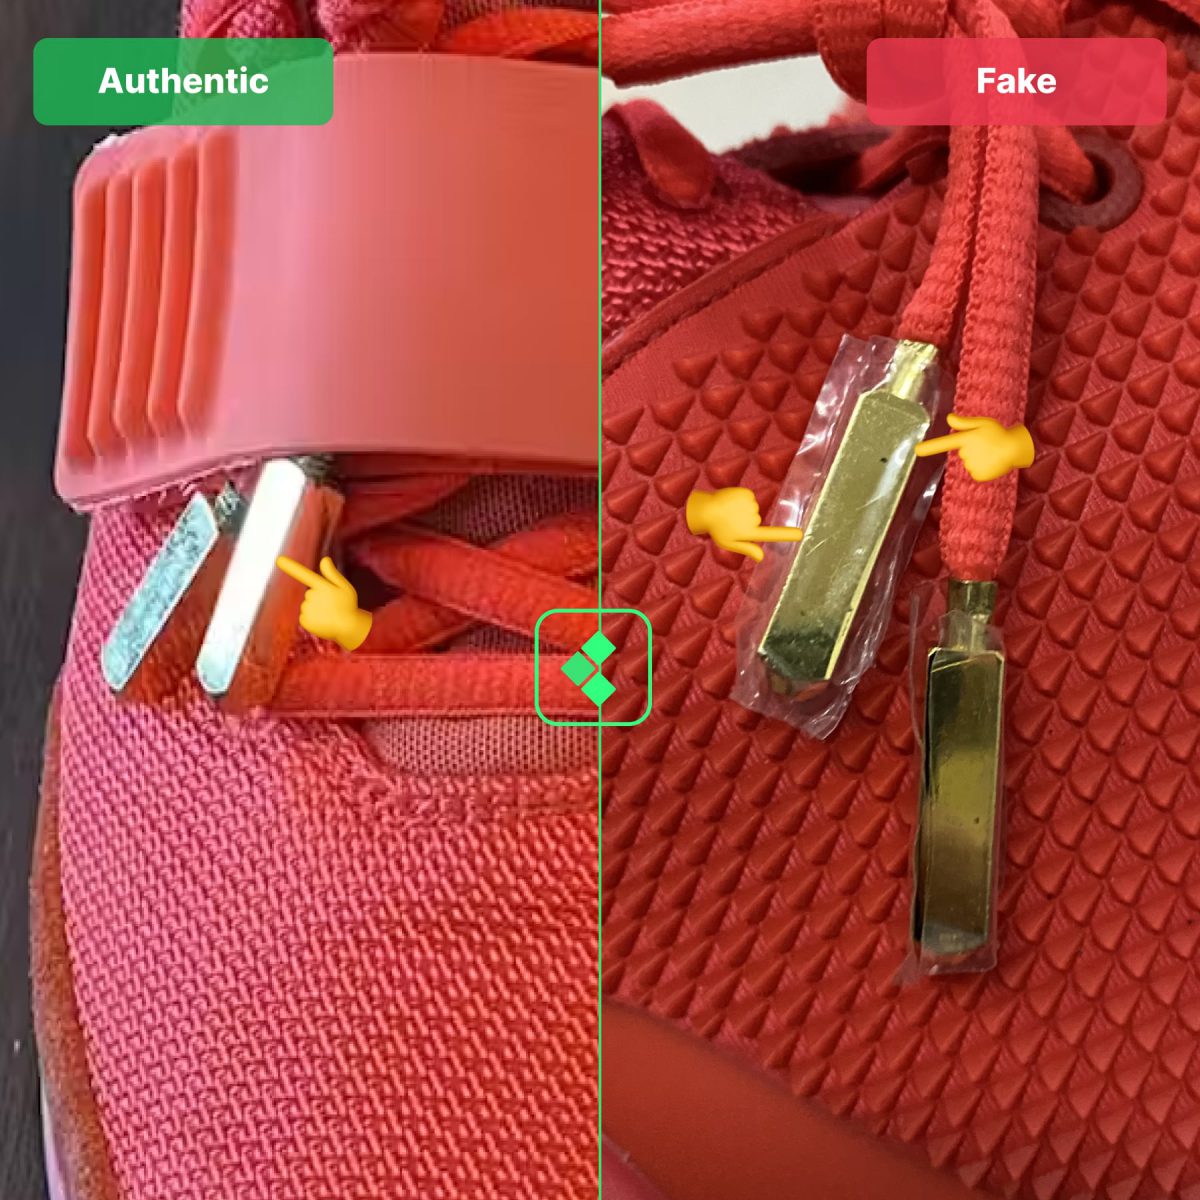 Authentic vs fake Yeezy Red October Comparison: Lace Plates